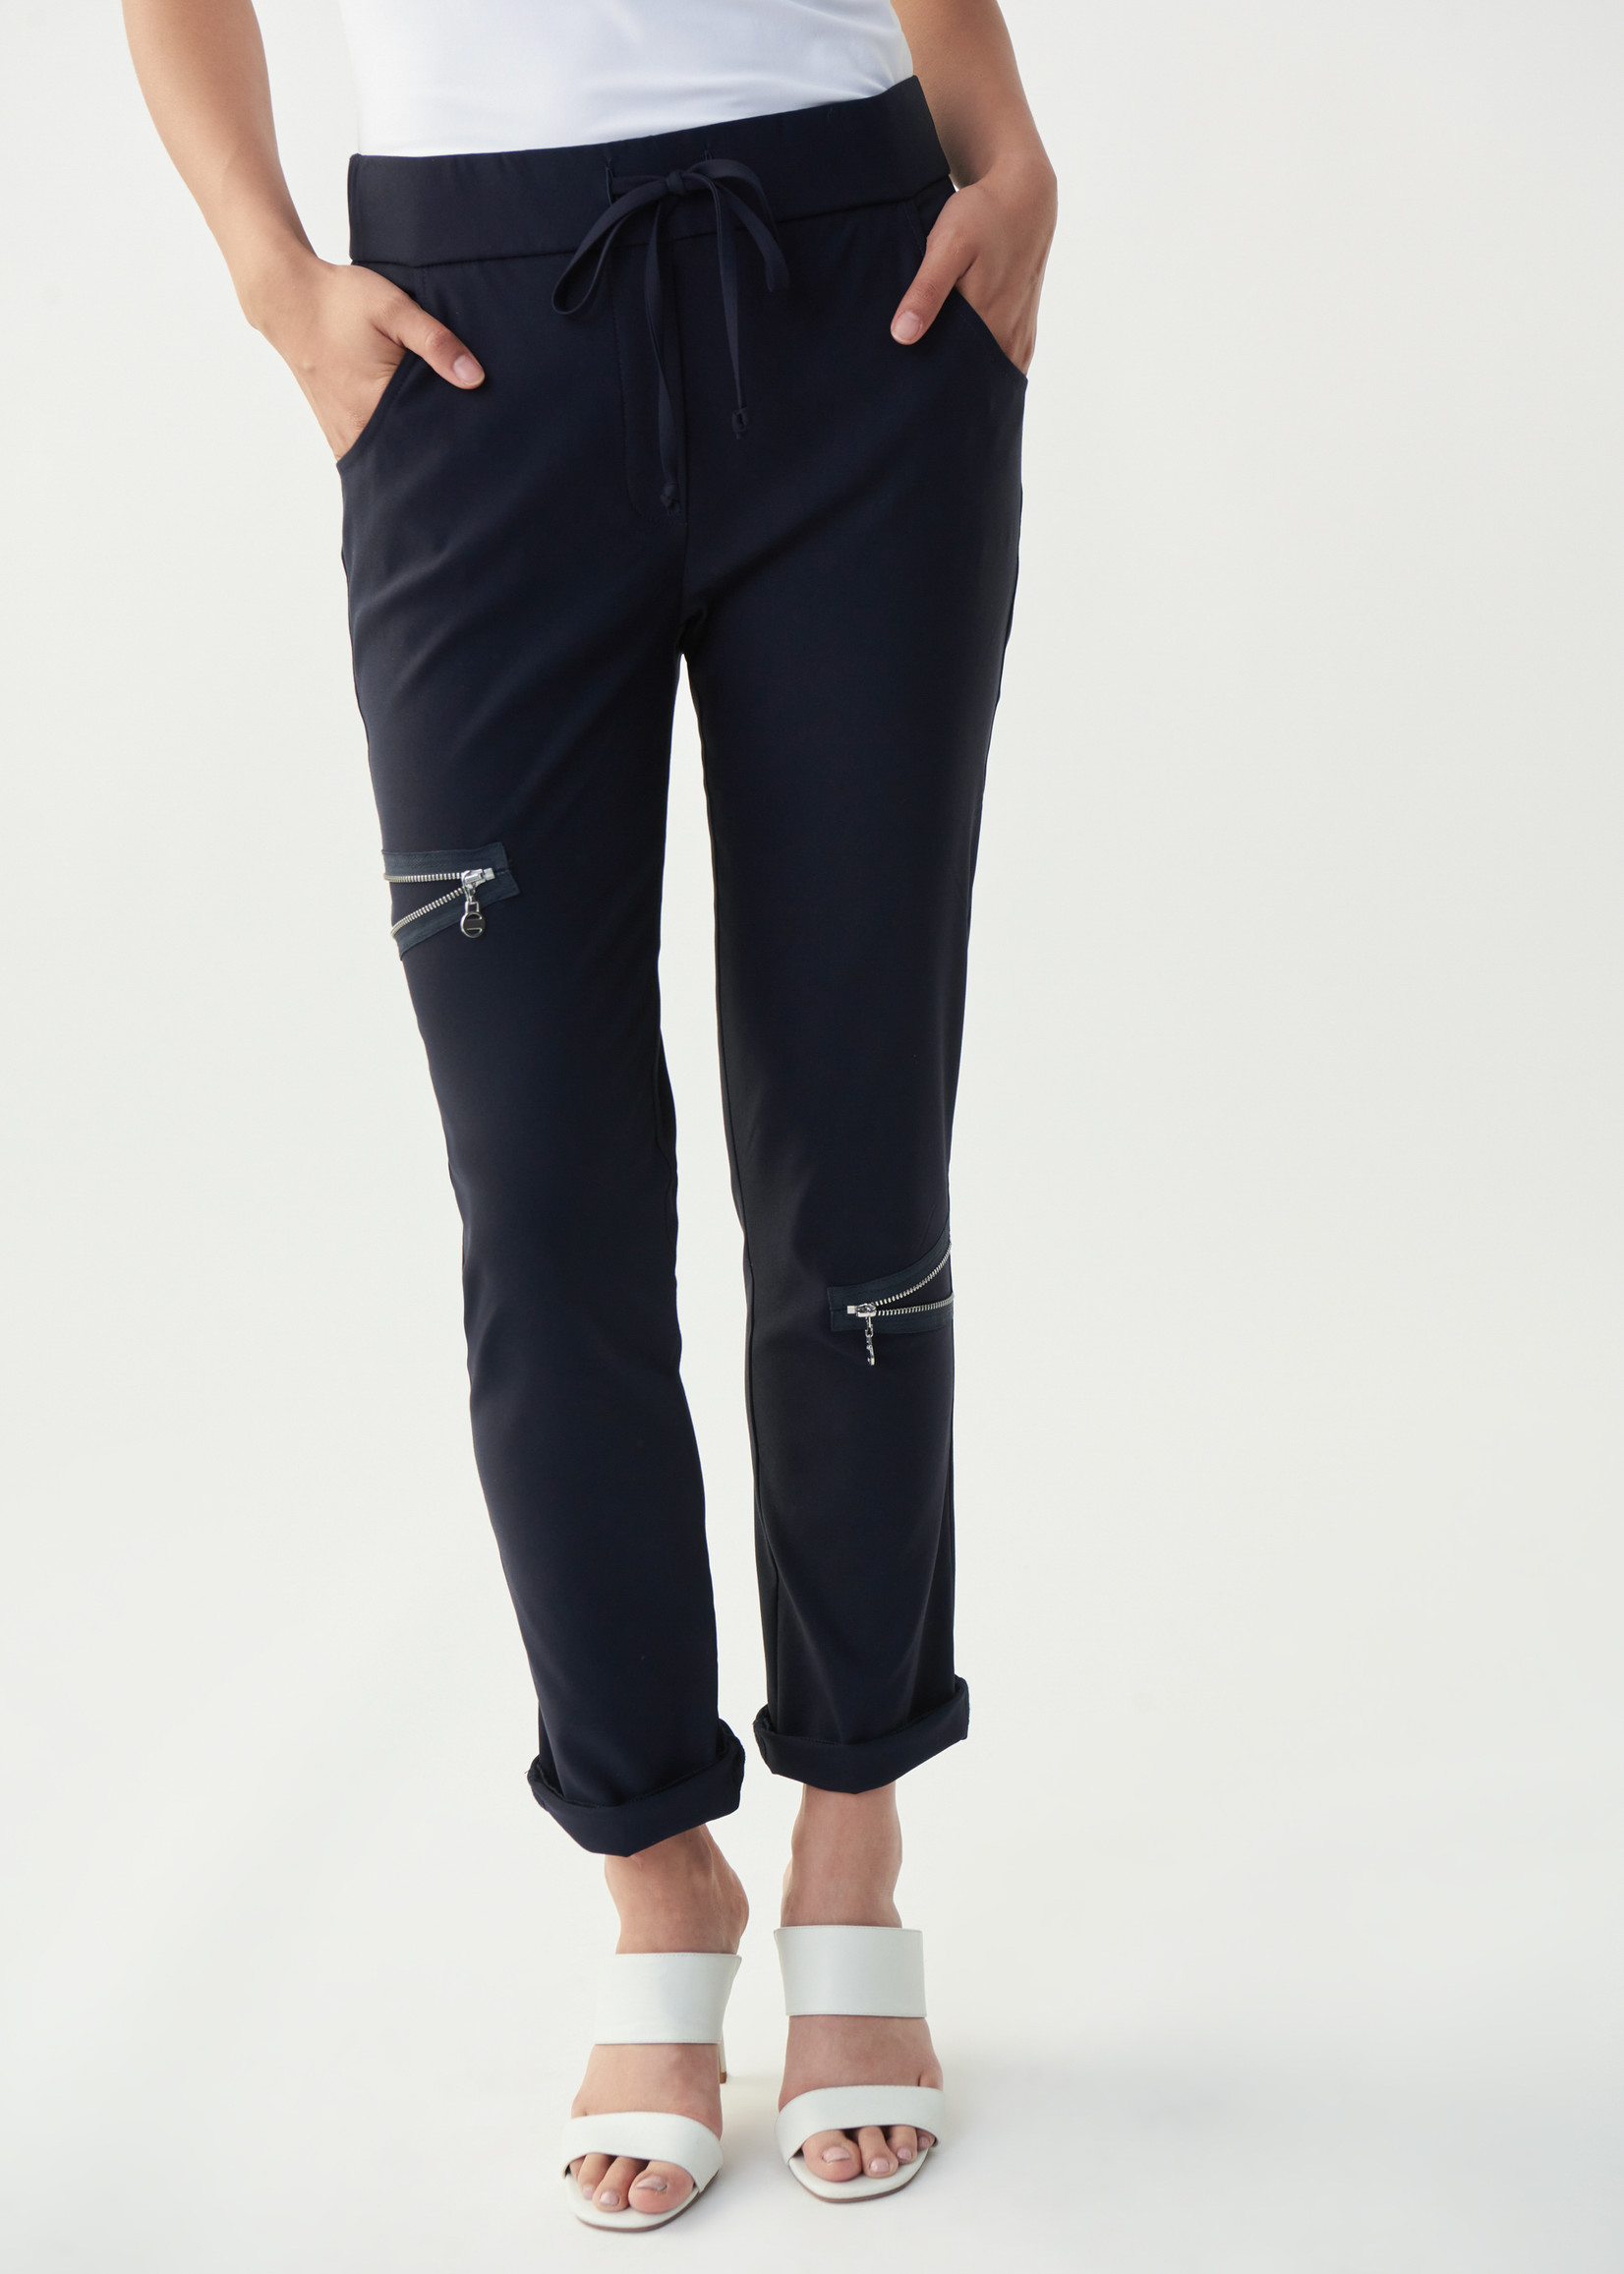 Joseph Ribkoff Navy Ankle Pant with Cuff and Zippers